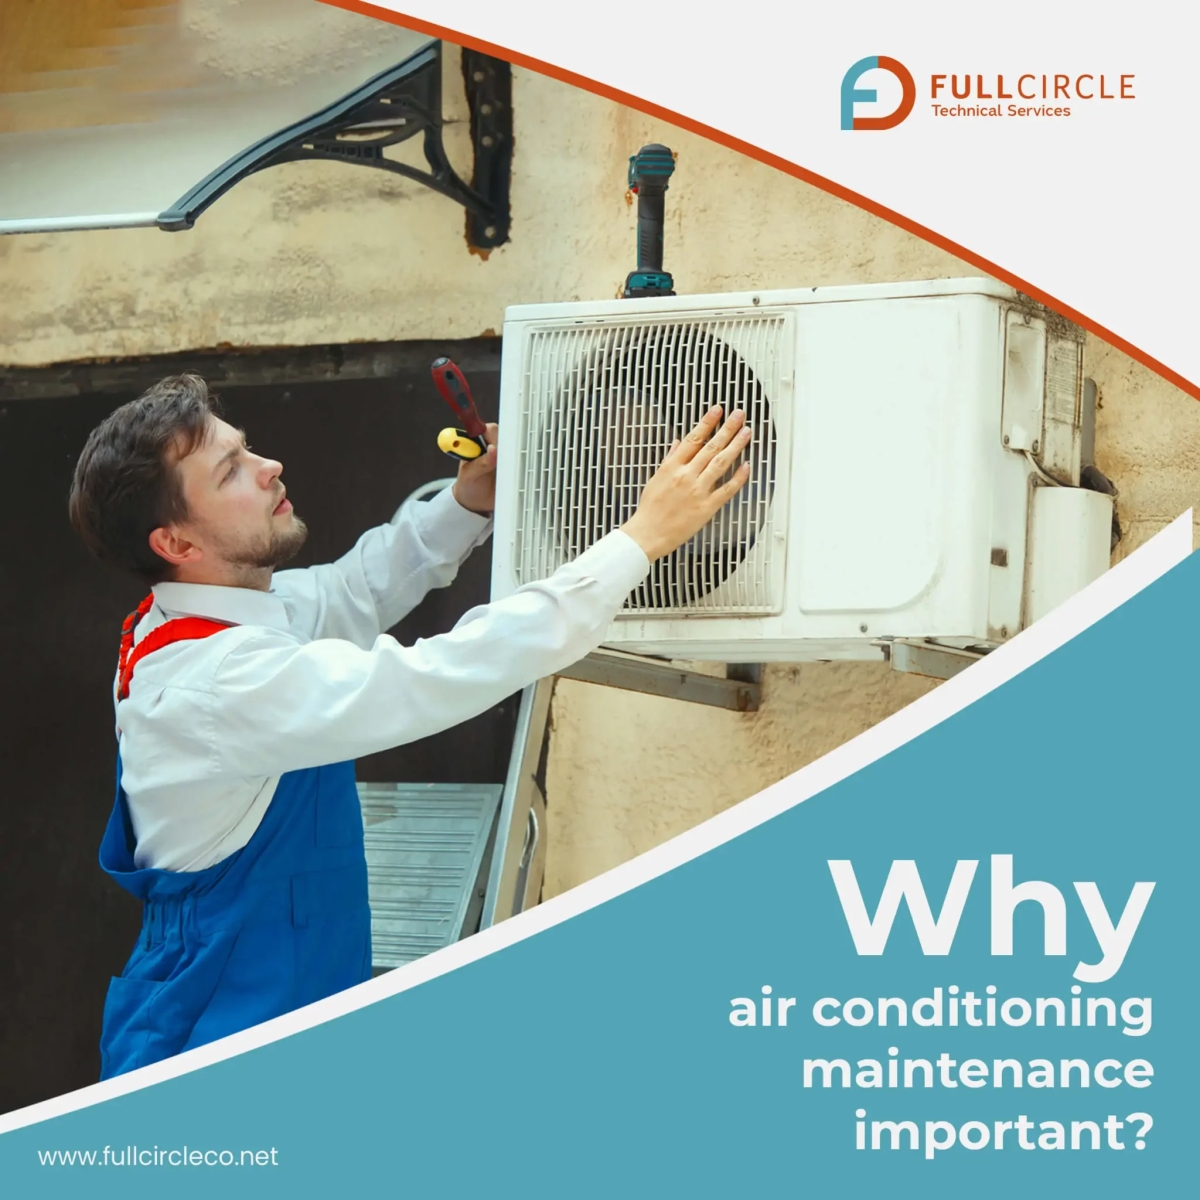 Why air conditioning maintenance is important?